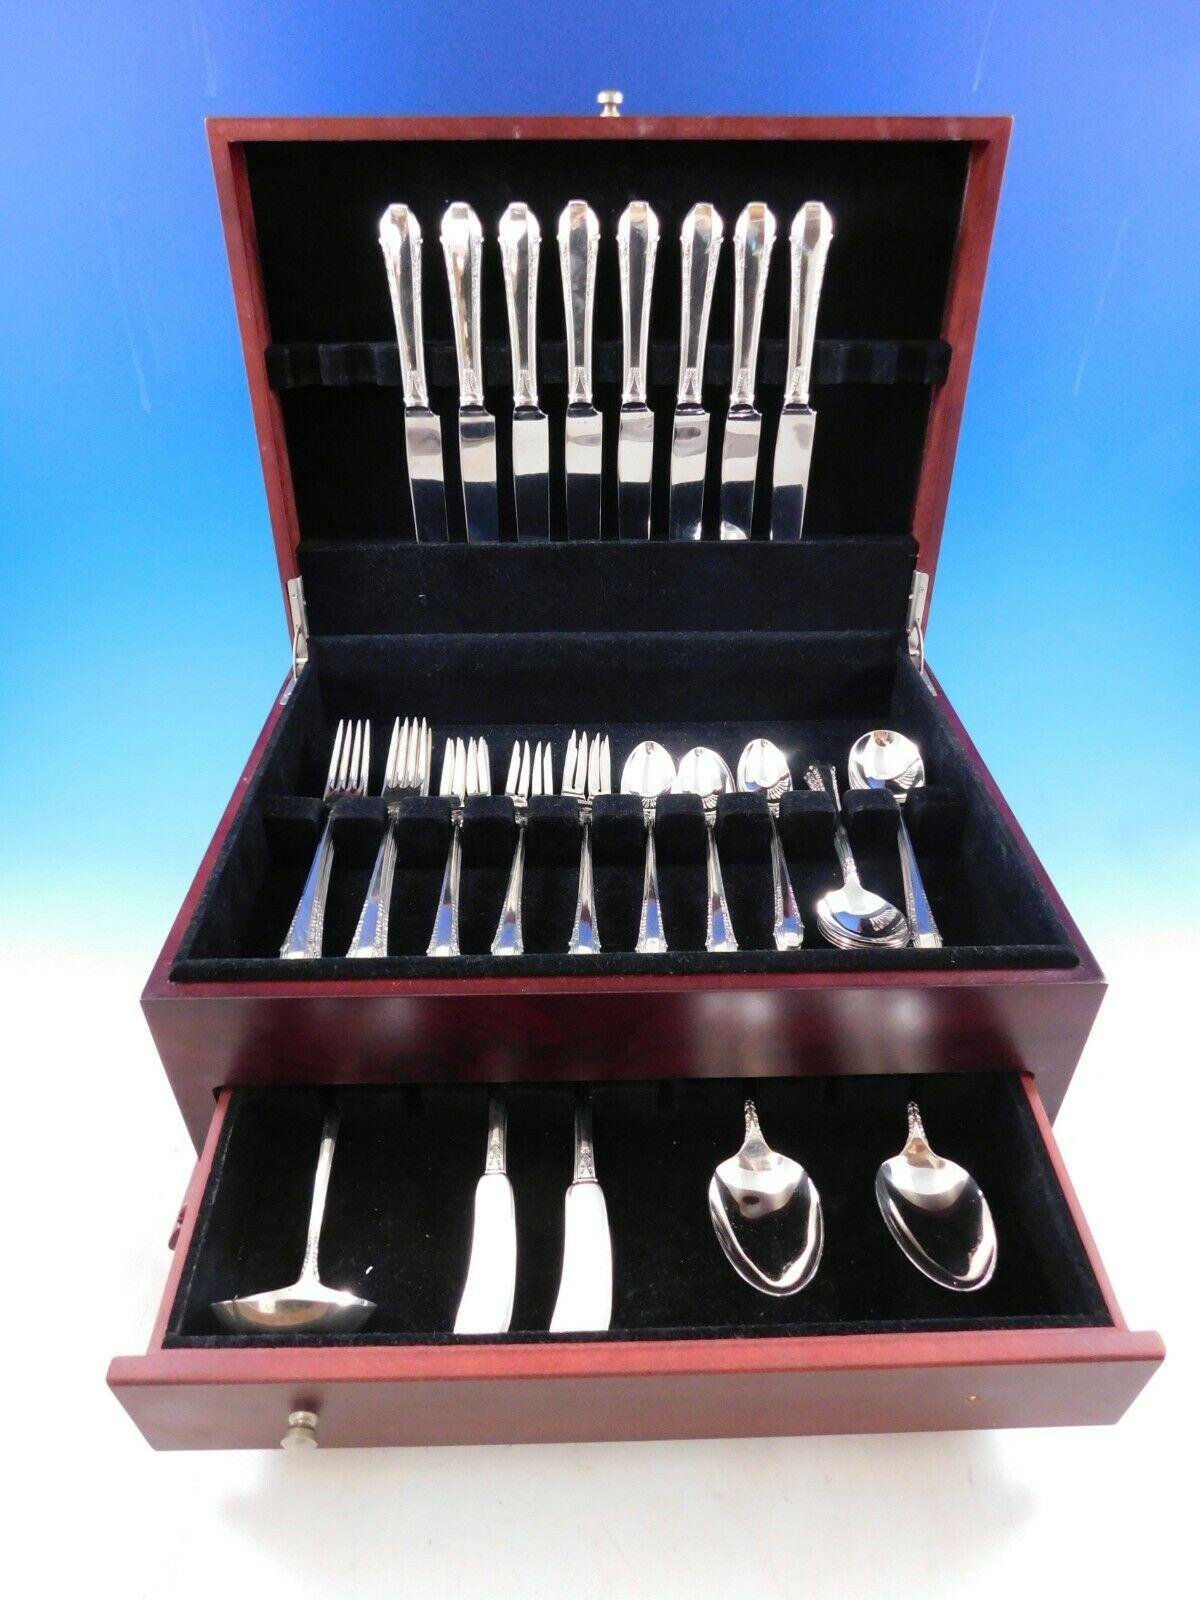 Art Deco Enchantress by International c1937 sterling silver flatware set, 51 pieces. This set includes:

8 knives, 9 1/8